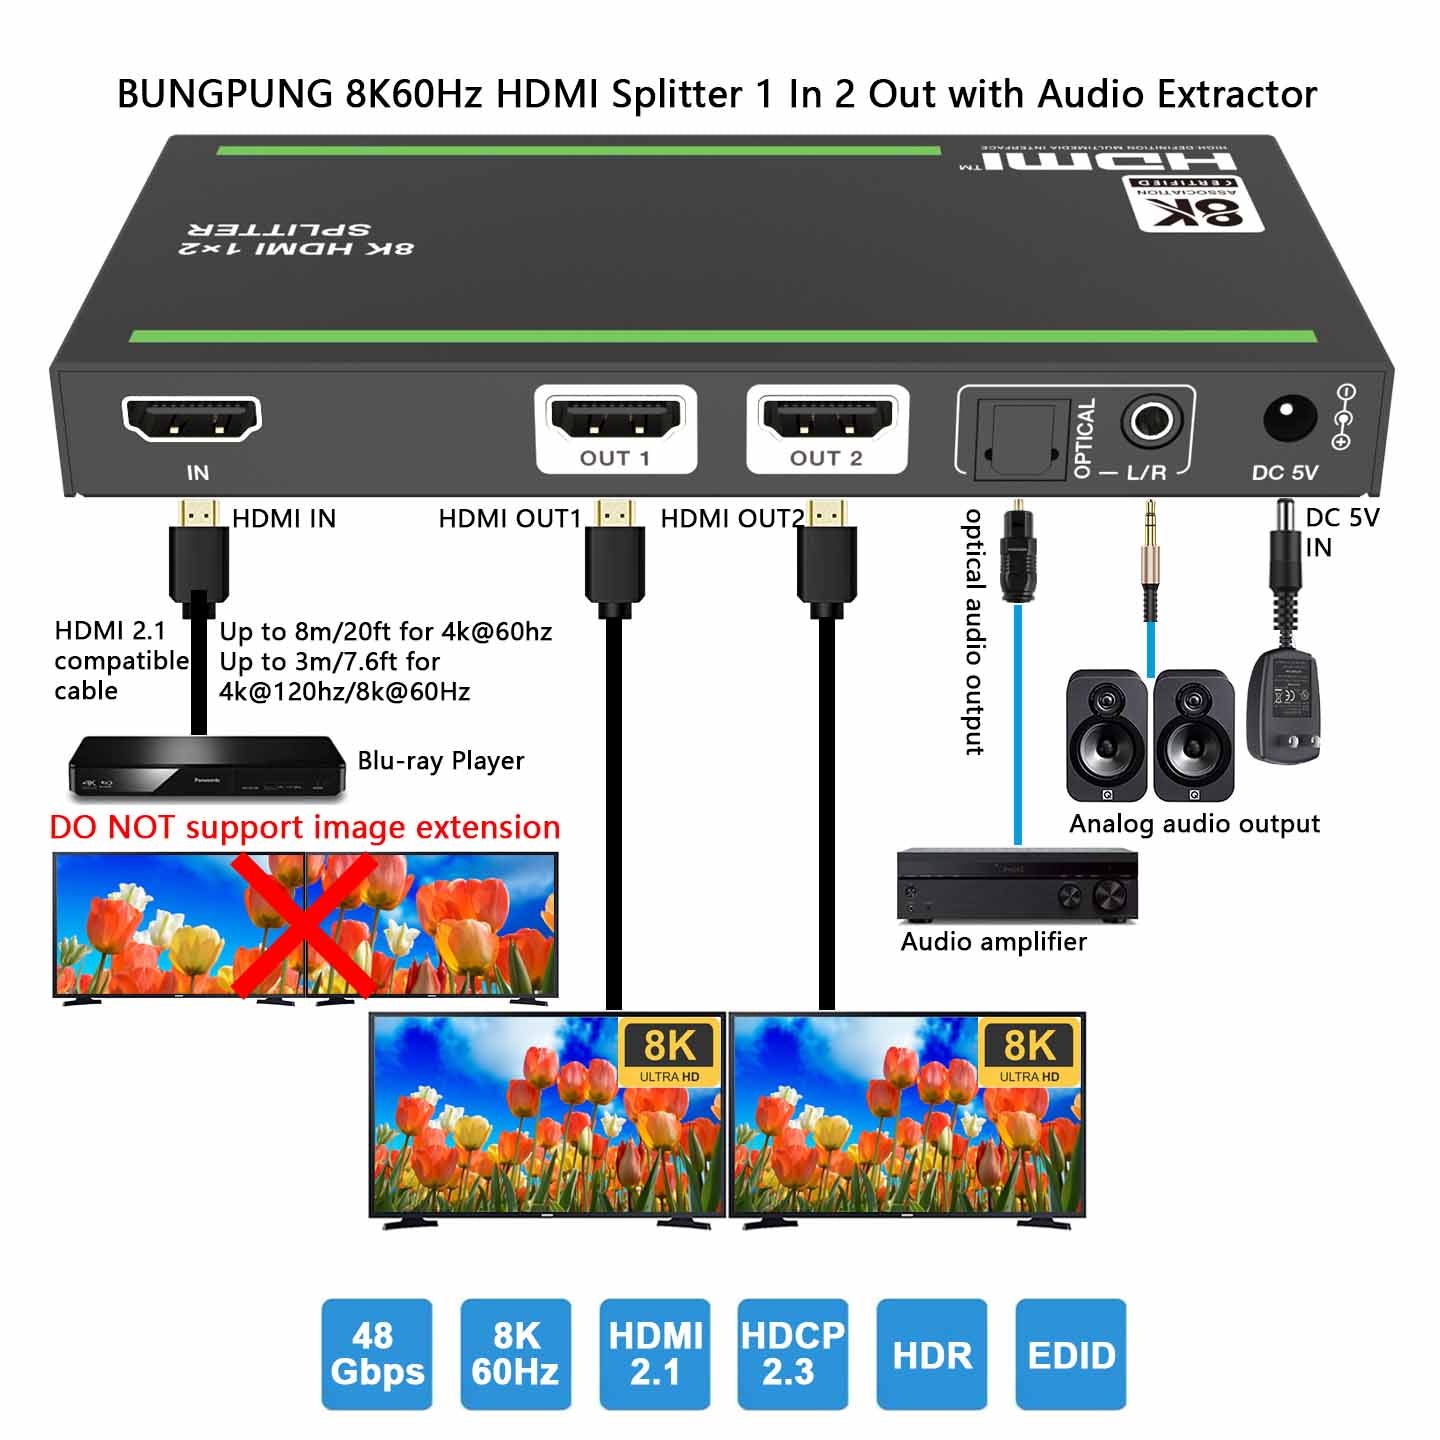 8K@60Hz HDMI Splitter 1 in 2 out Audio Extractor EDID Management-BUNGPUNG